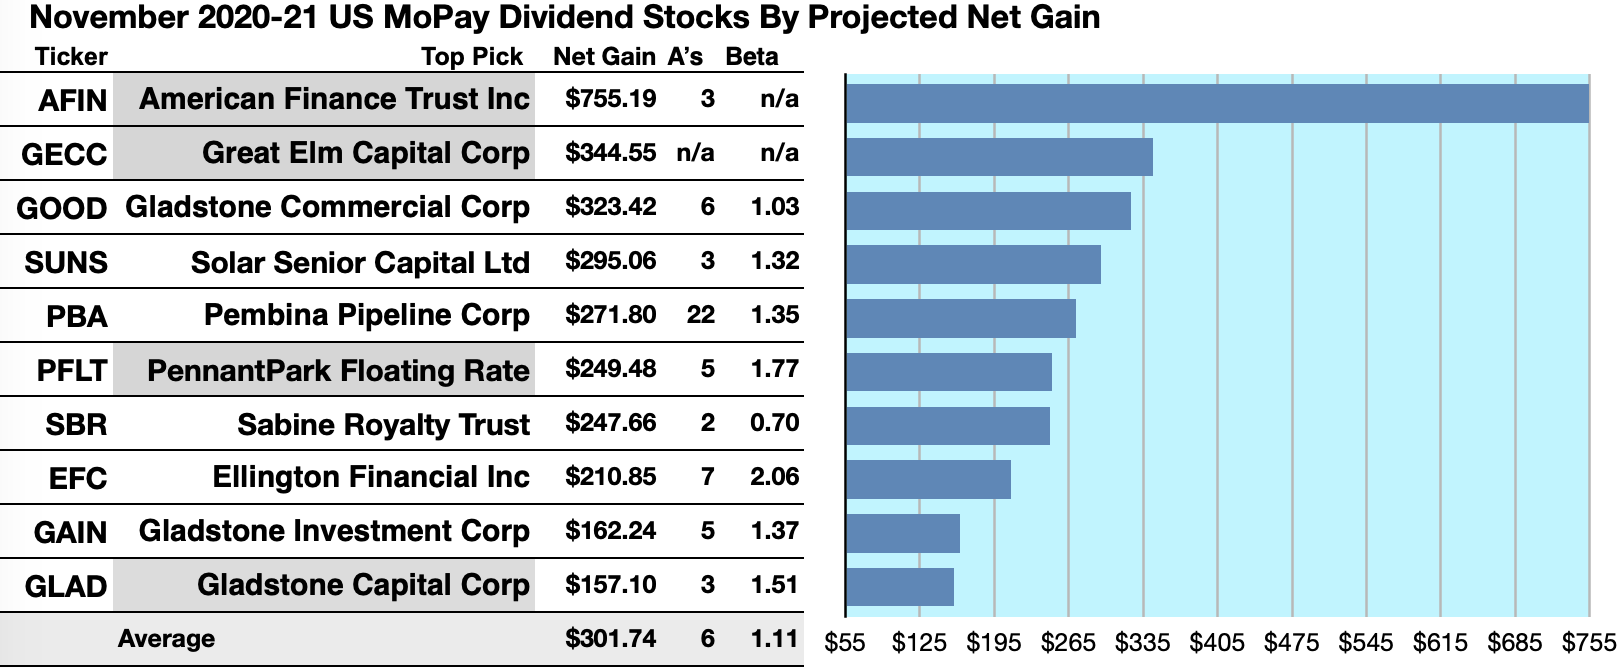 orc stock dividend yield